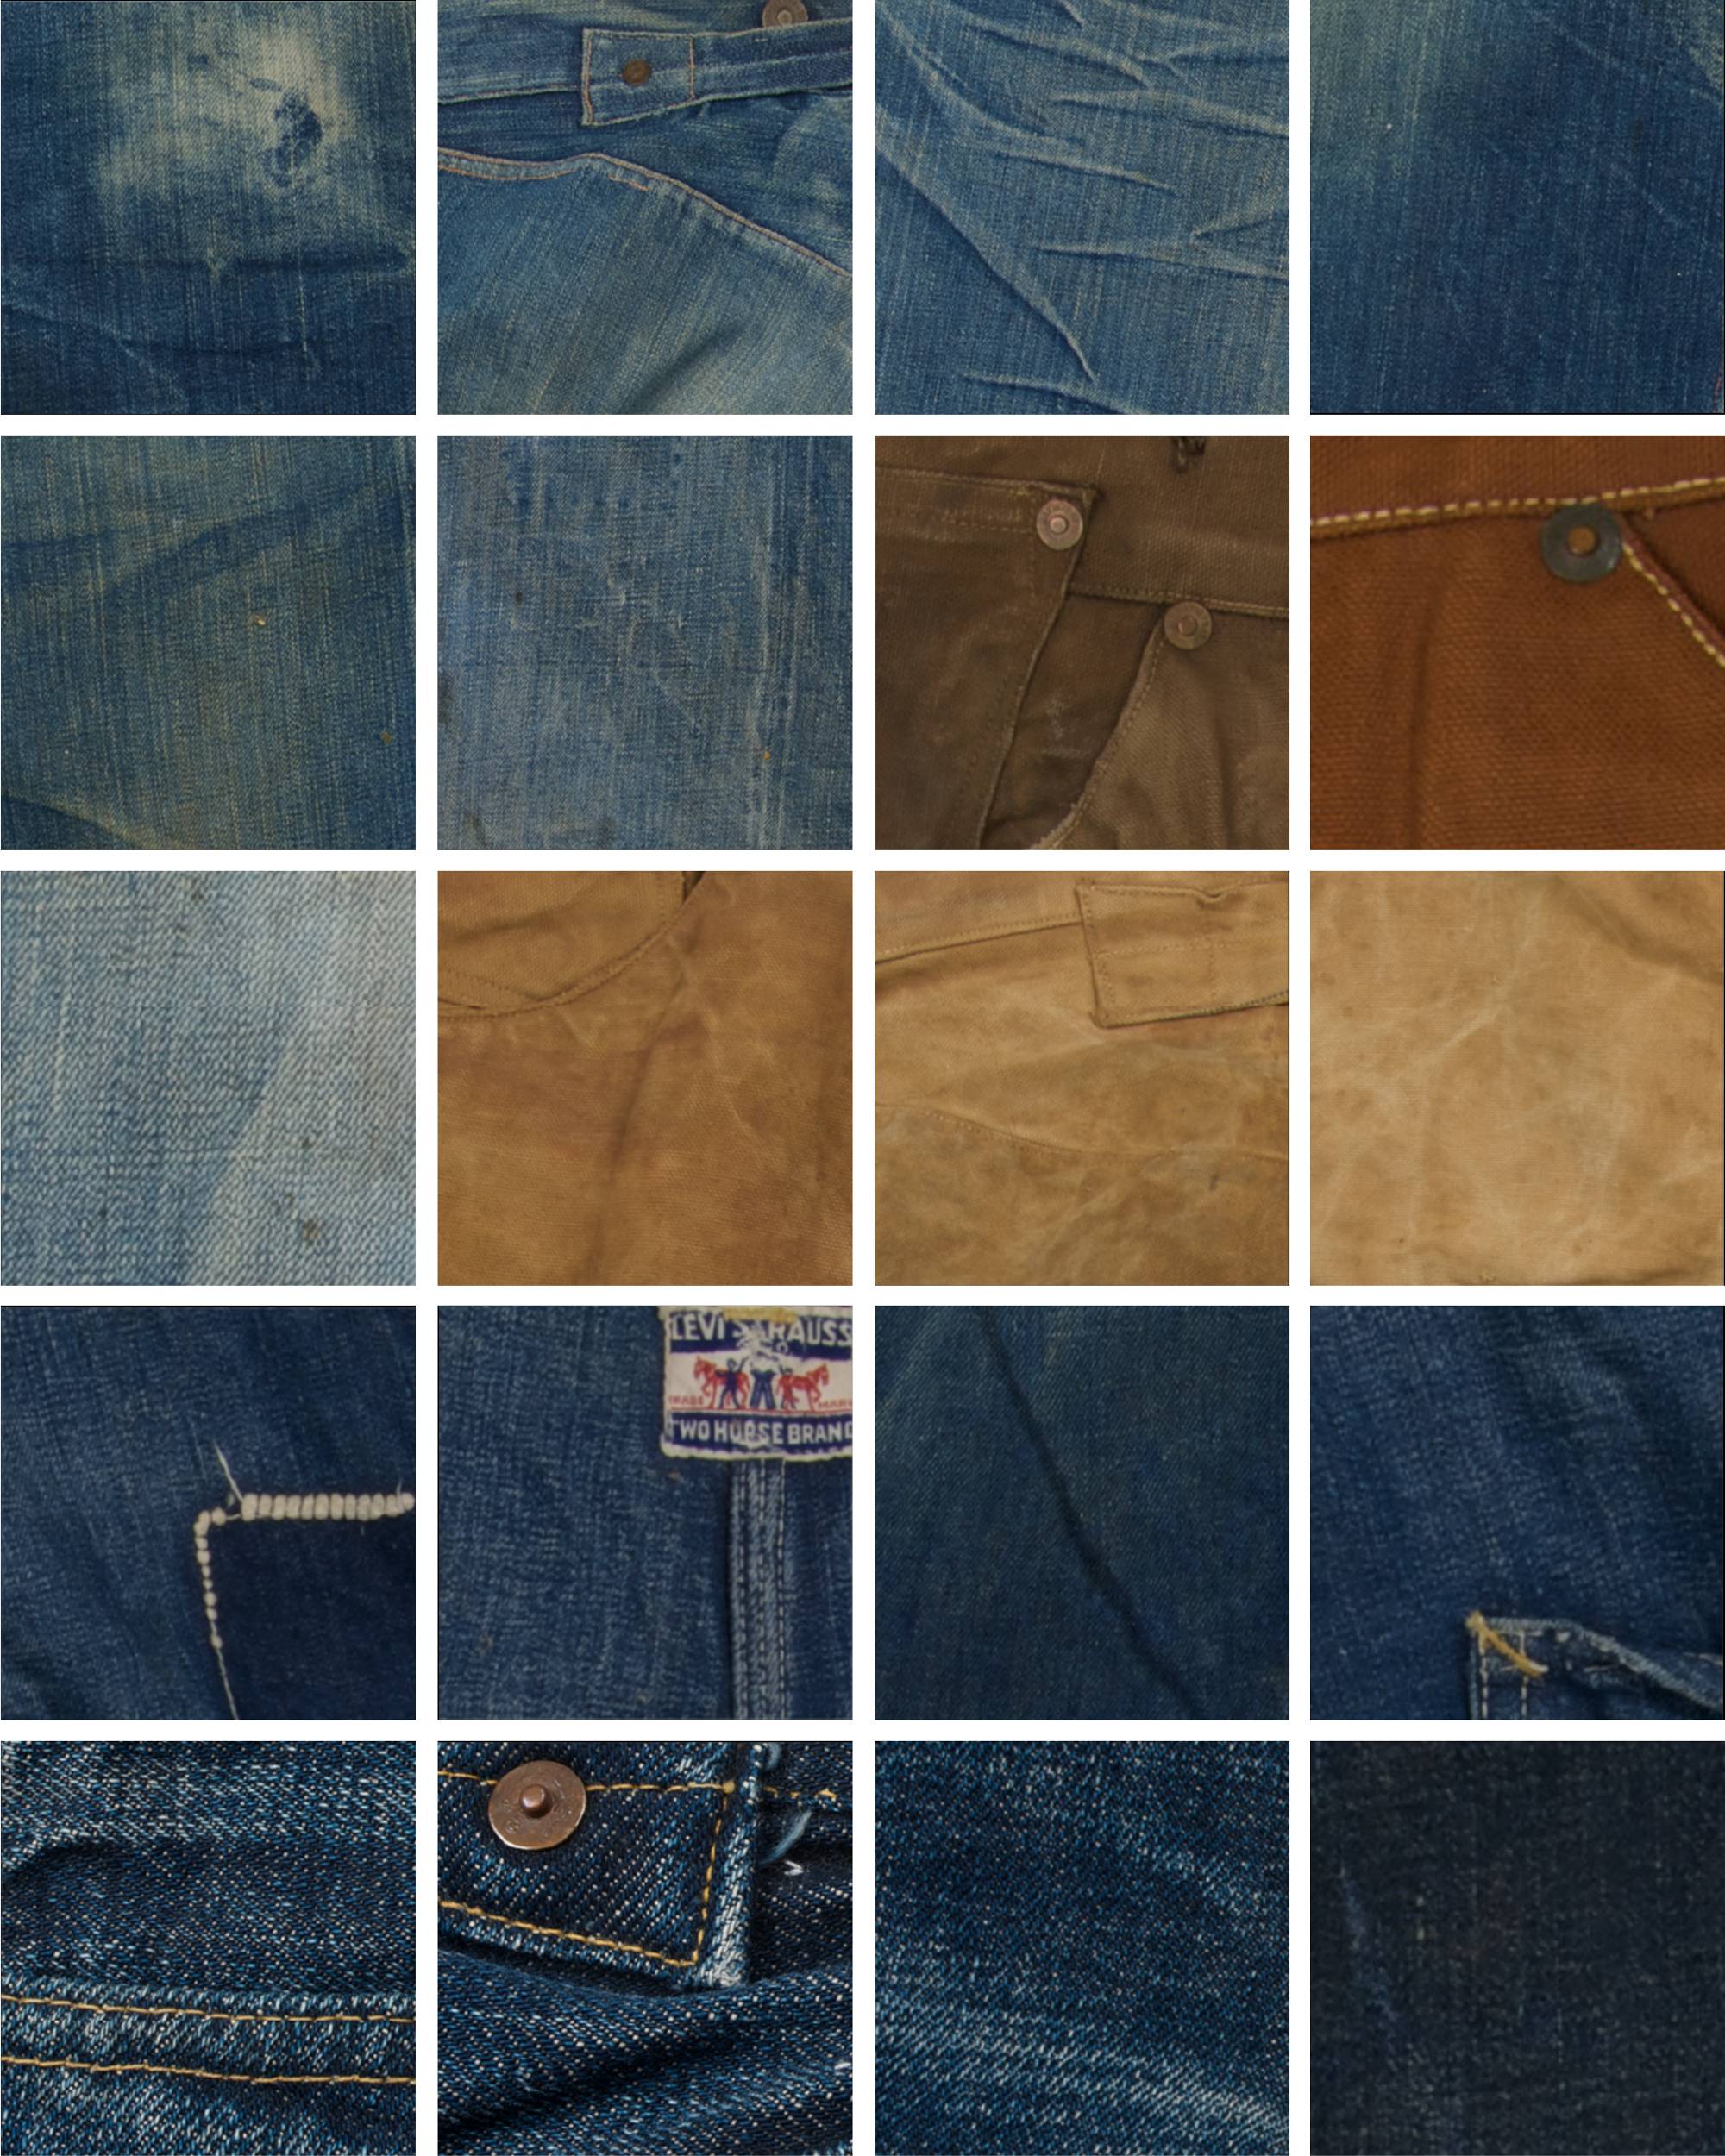 Why Is Denim Blue? History Behind the Color of Jeans